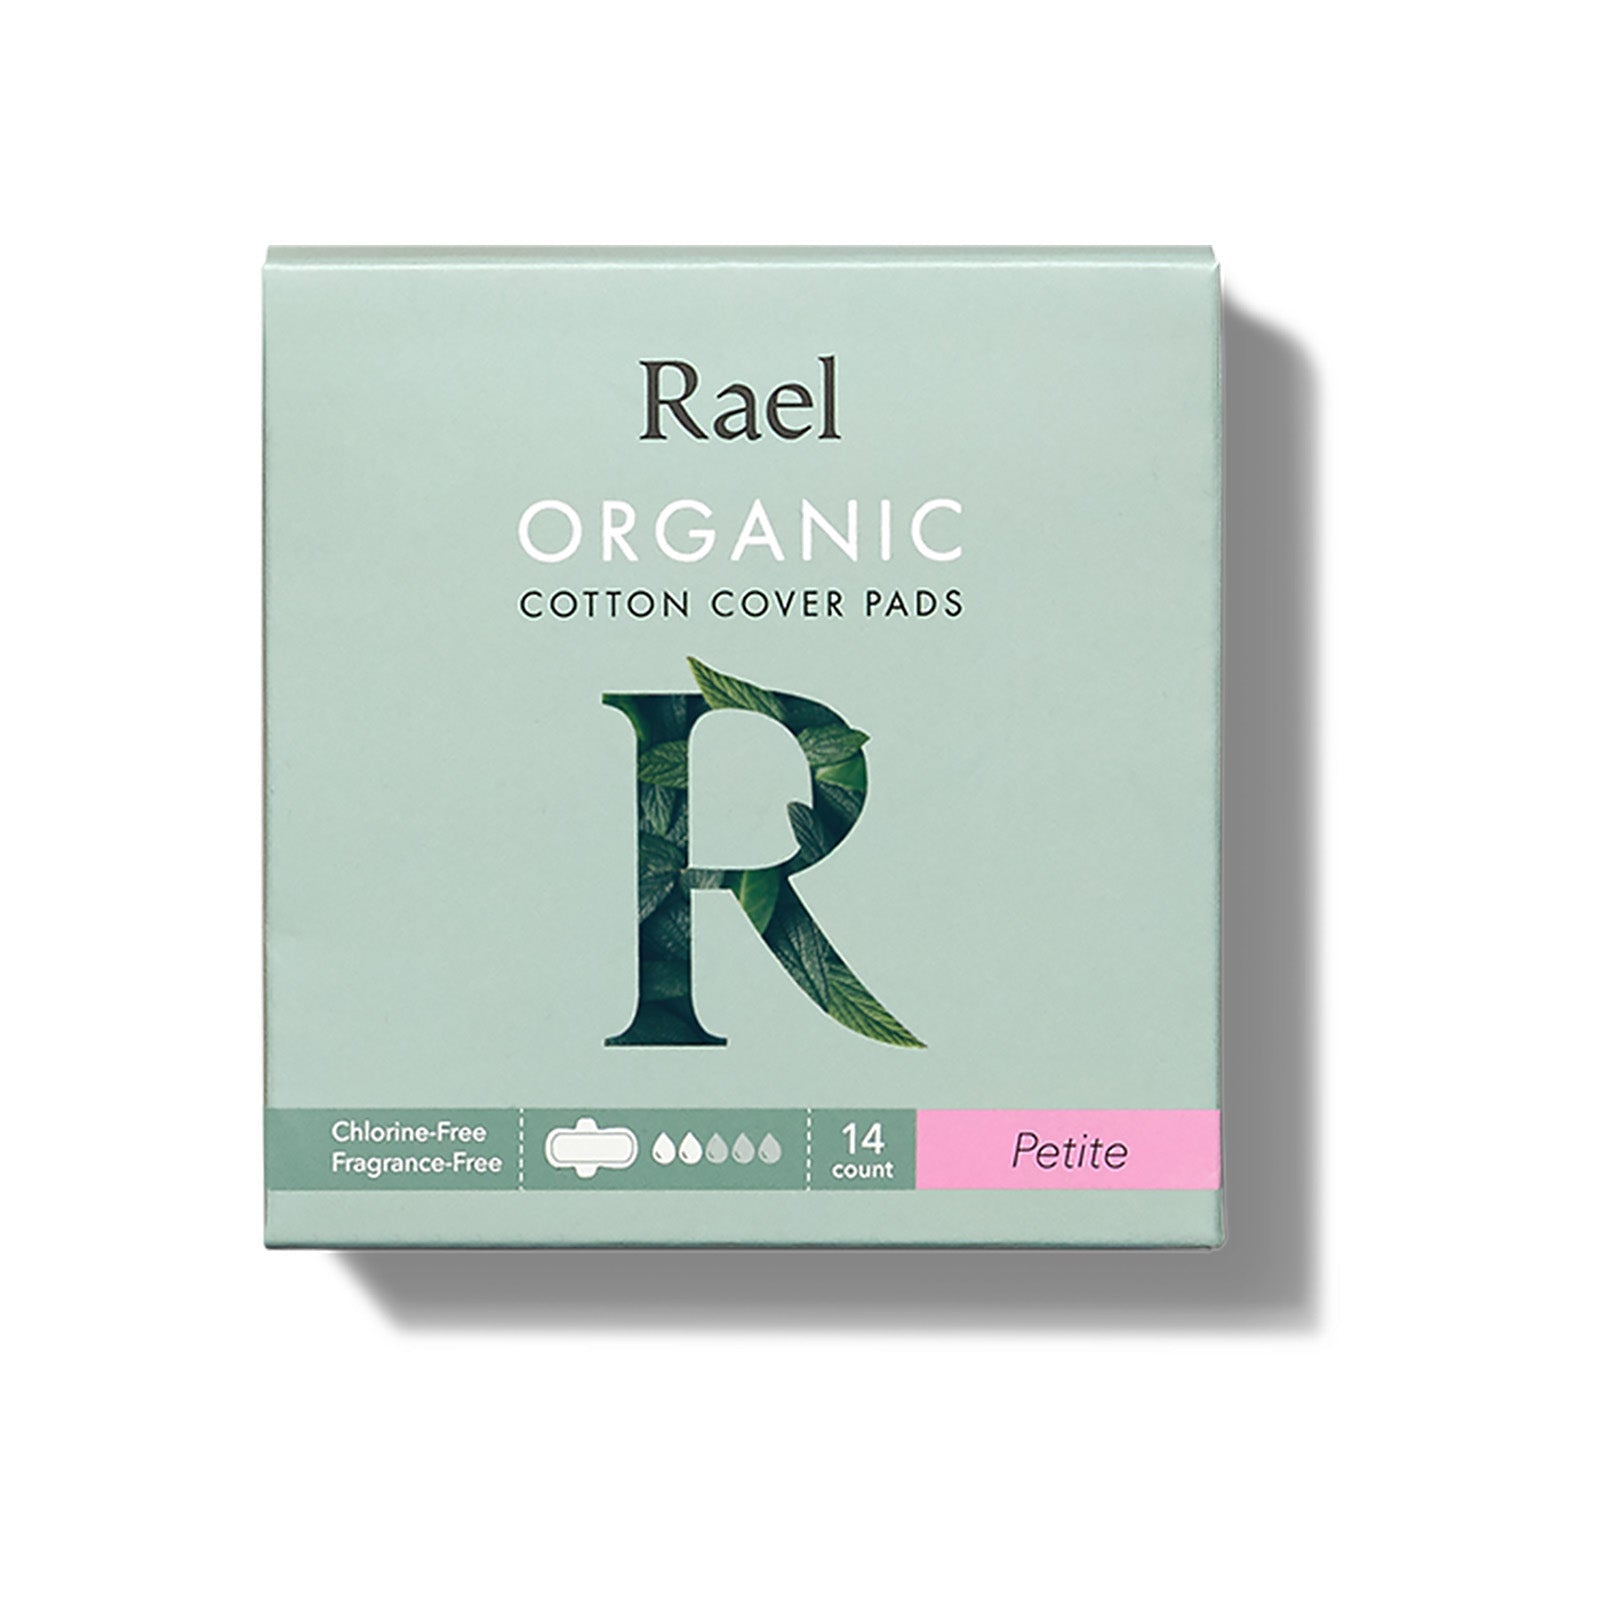 2) Rael Organic Cotton Cover Period Underwear - Panty Style Pad, S